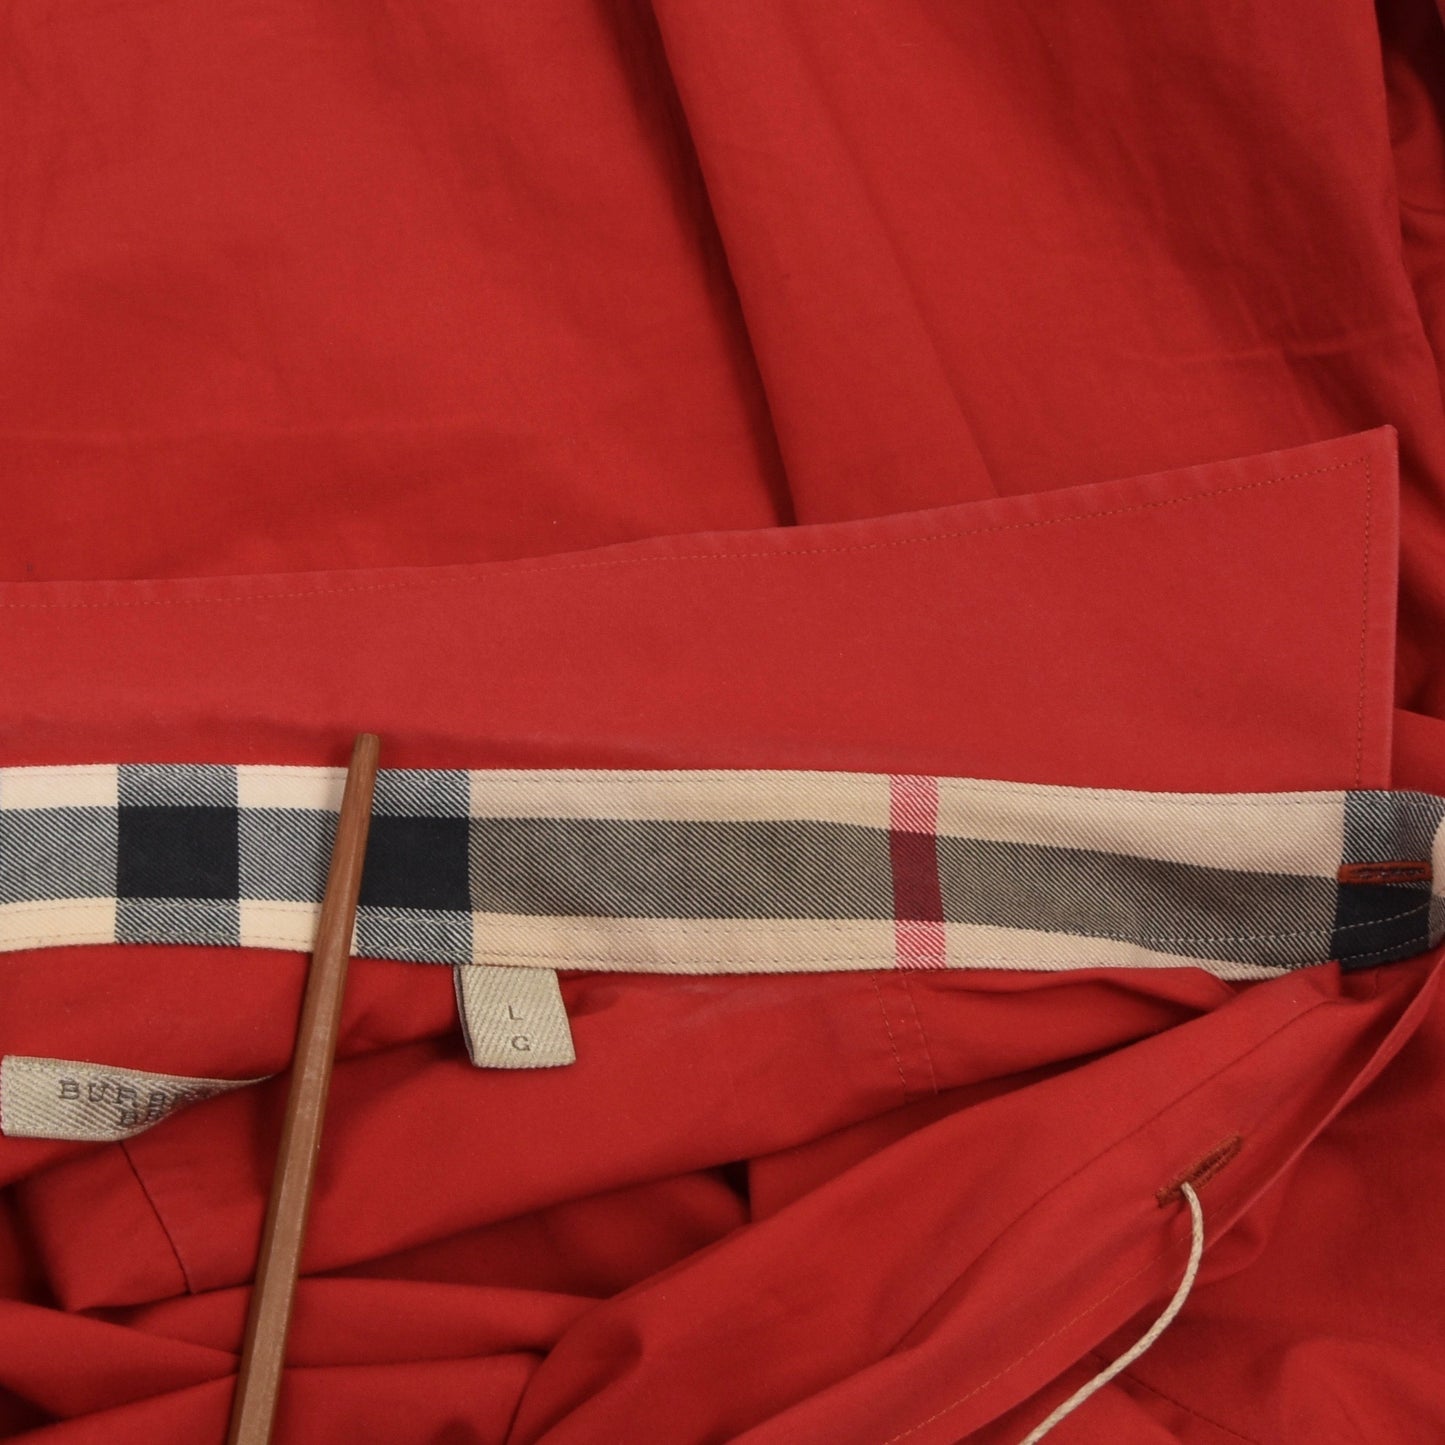 Burberry Brit Shirt Size L - Red